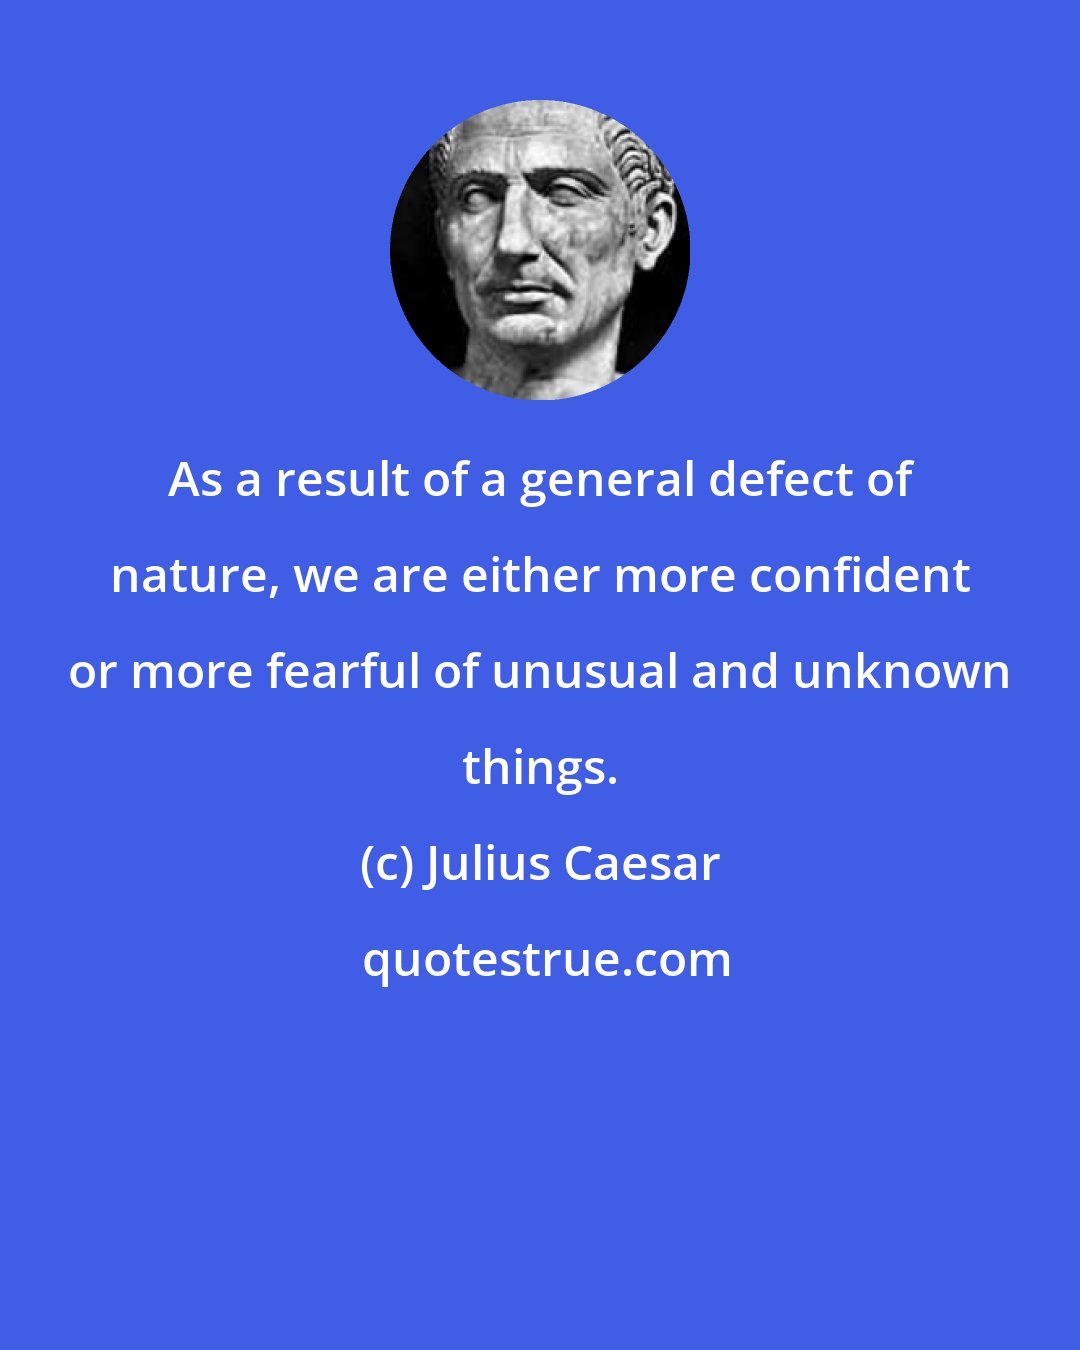 Julius Caesar: As a result of a general defect of nature, we are either more confident or more fearful of unusual and unknown things.